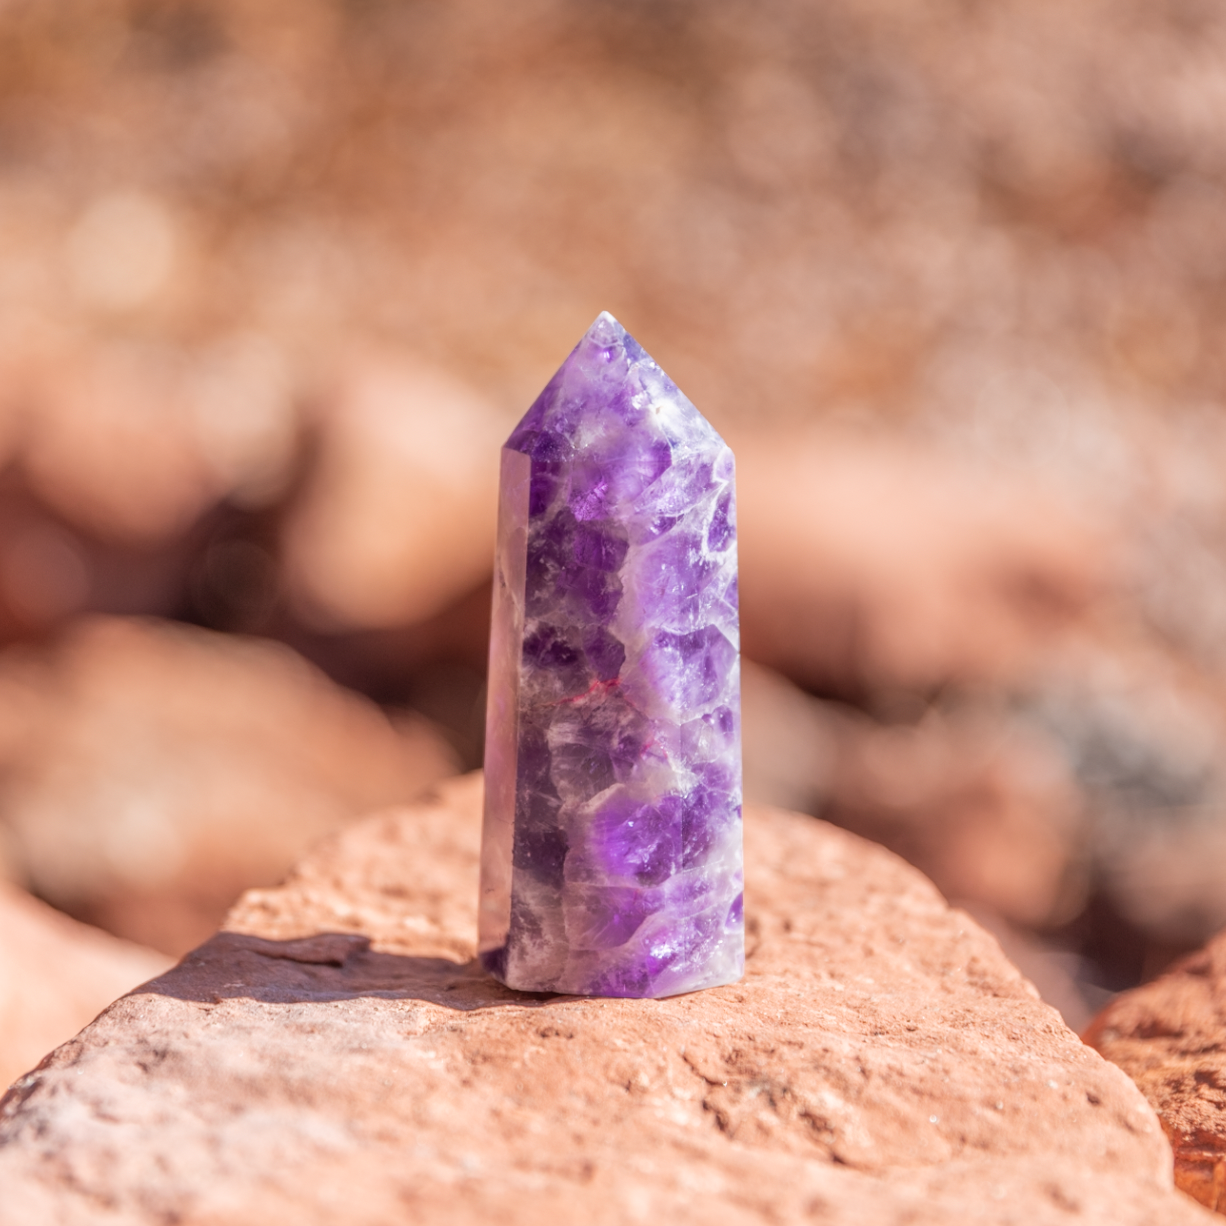 Sedona Crystals for Stress Relief Bundle